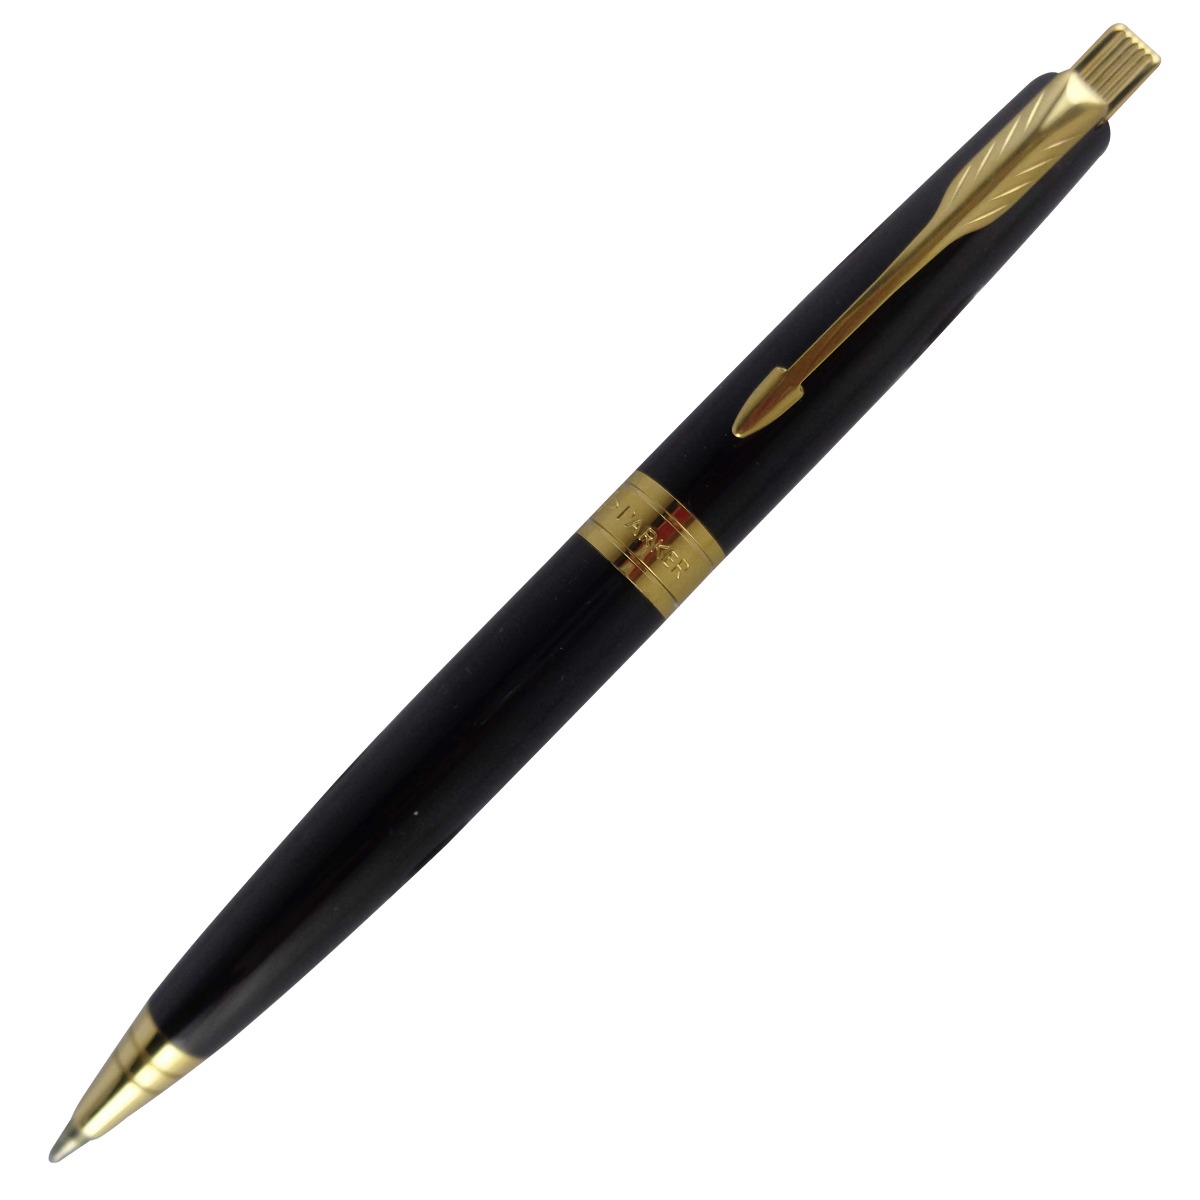 Parker Model: 14911 Aster Laq Black color Body with golden clip with free keychain medium tip retractable ball pen